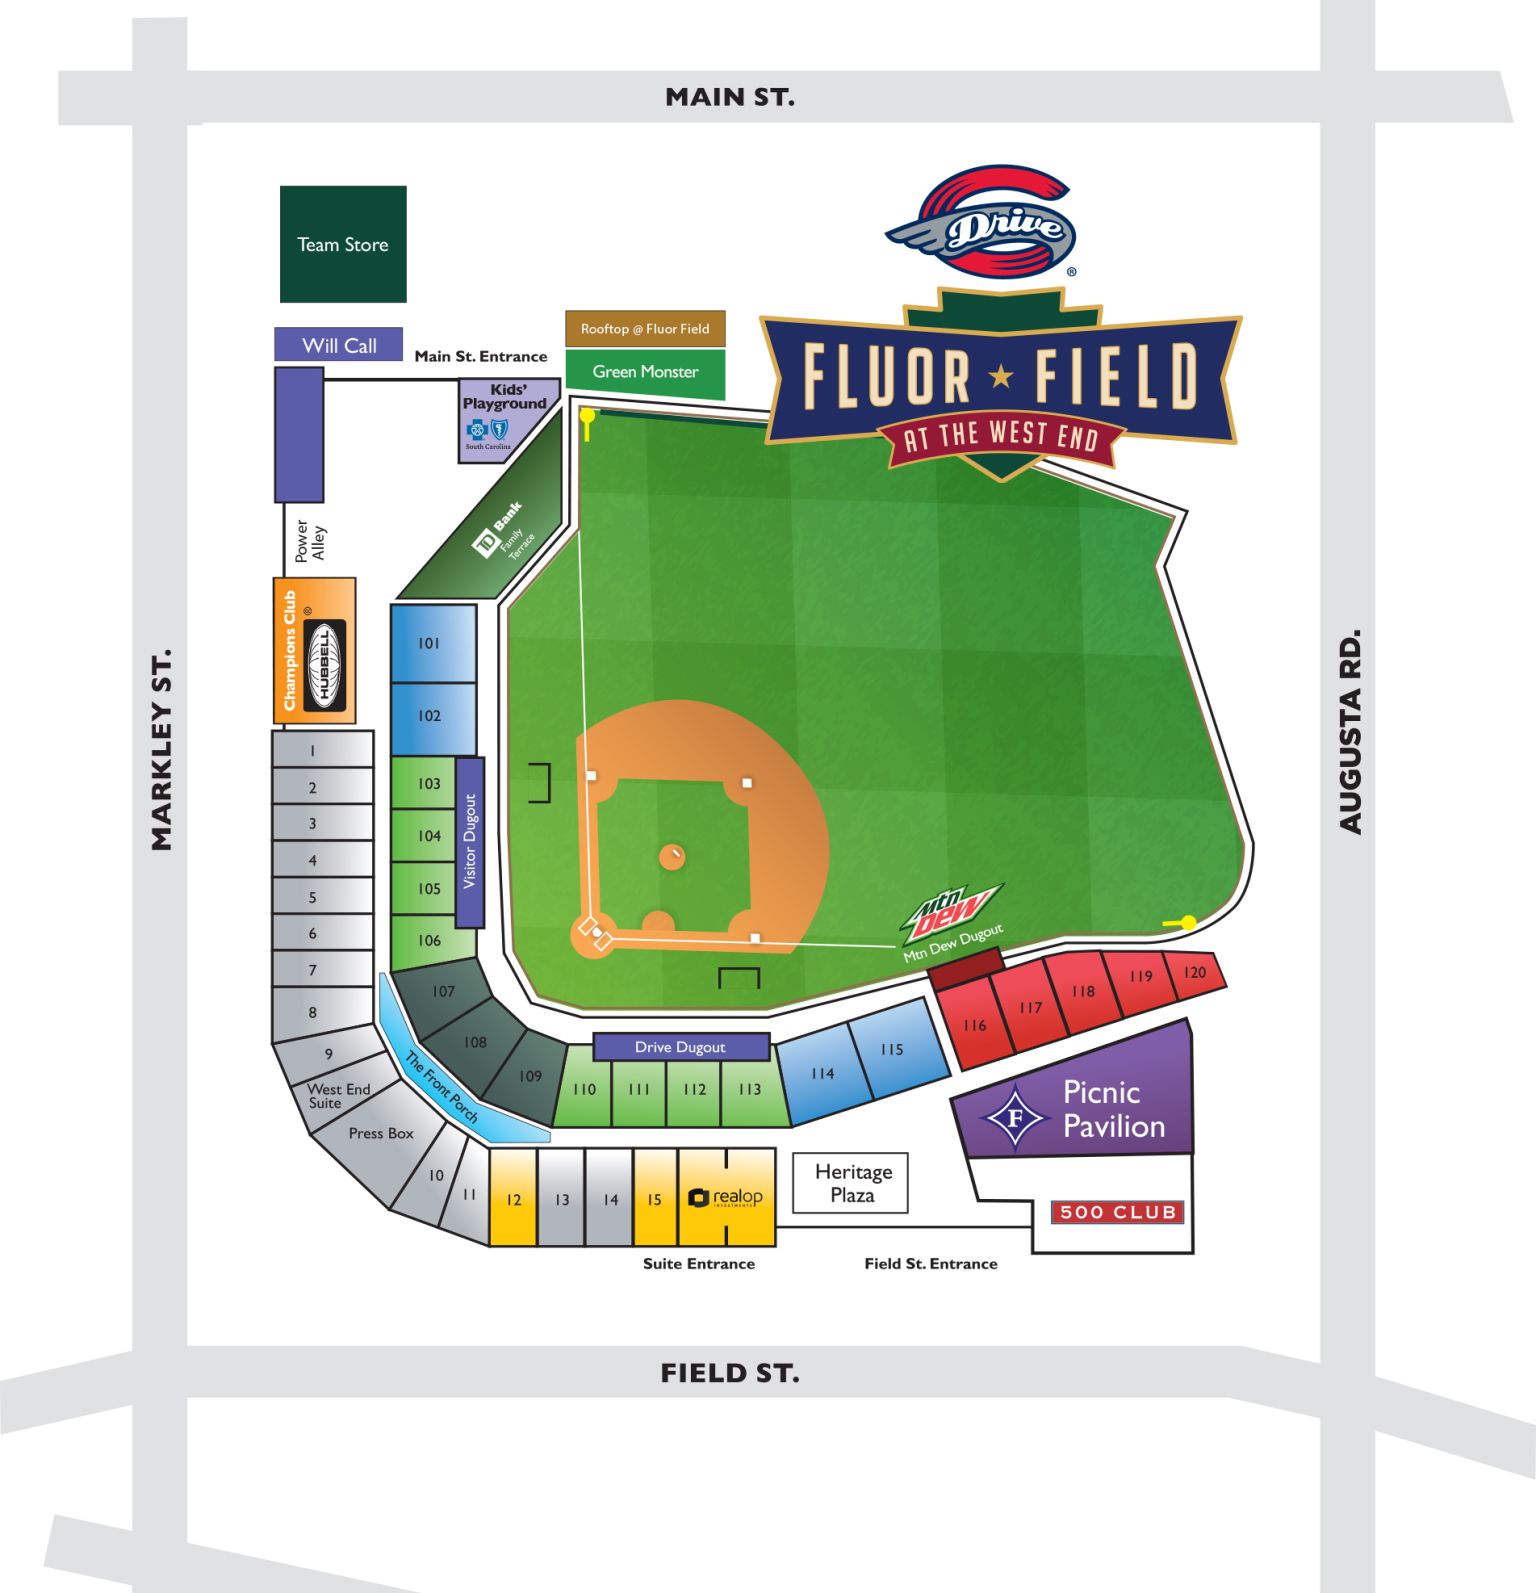 Ticket Prices and Ballpark Map Drive